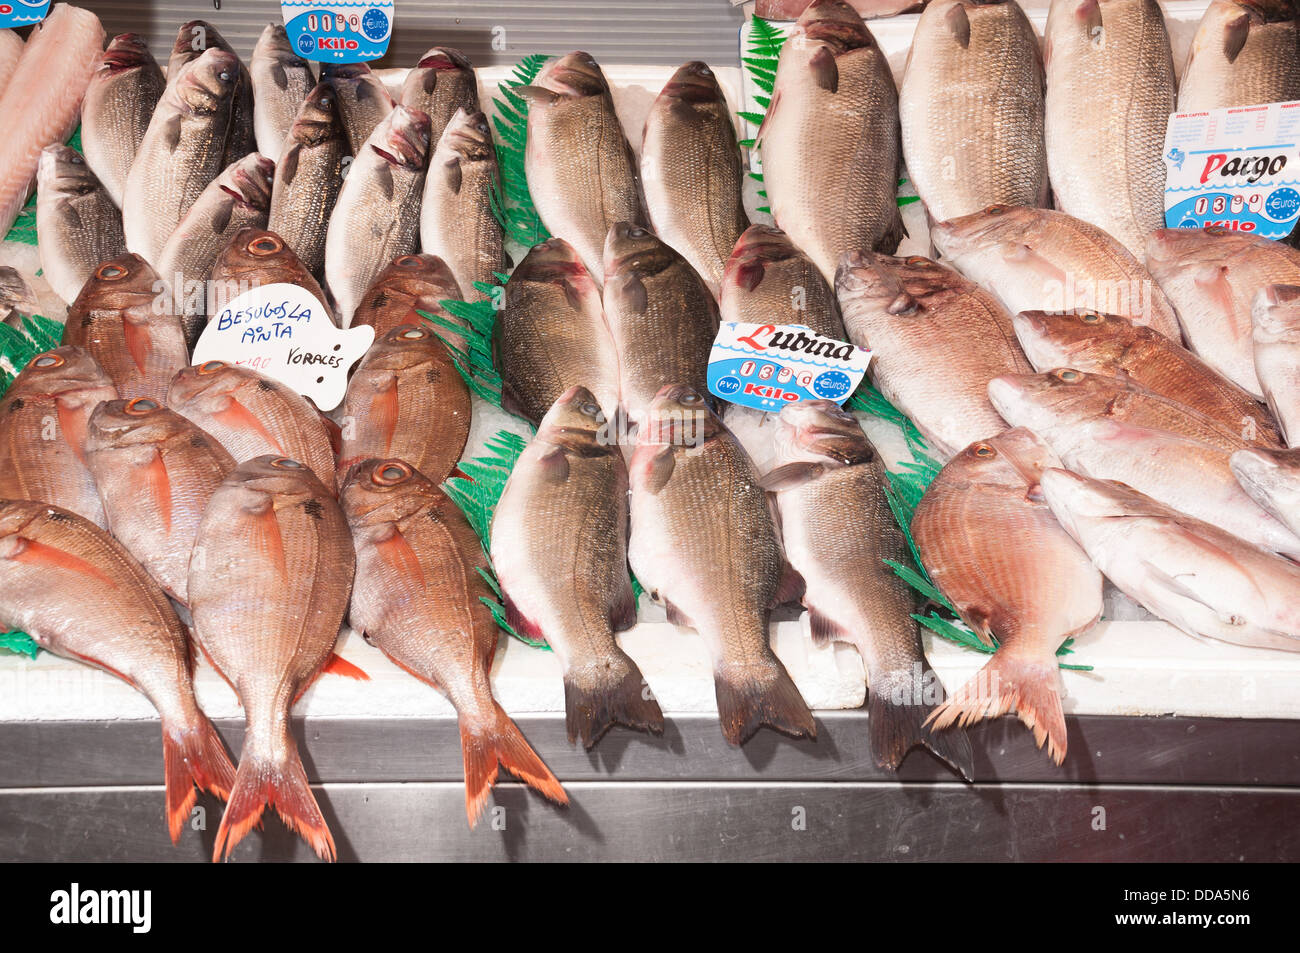 Various types of fesh fish for sale in the market of alaga, Spain Stock Photo